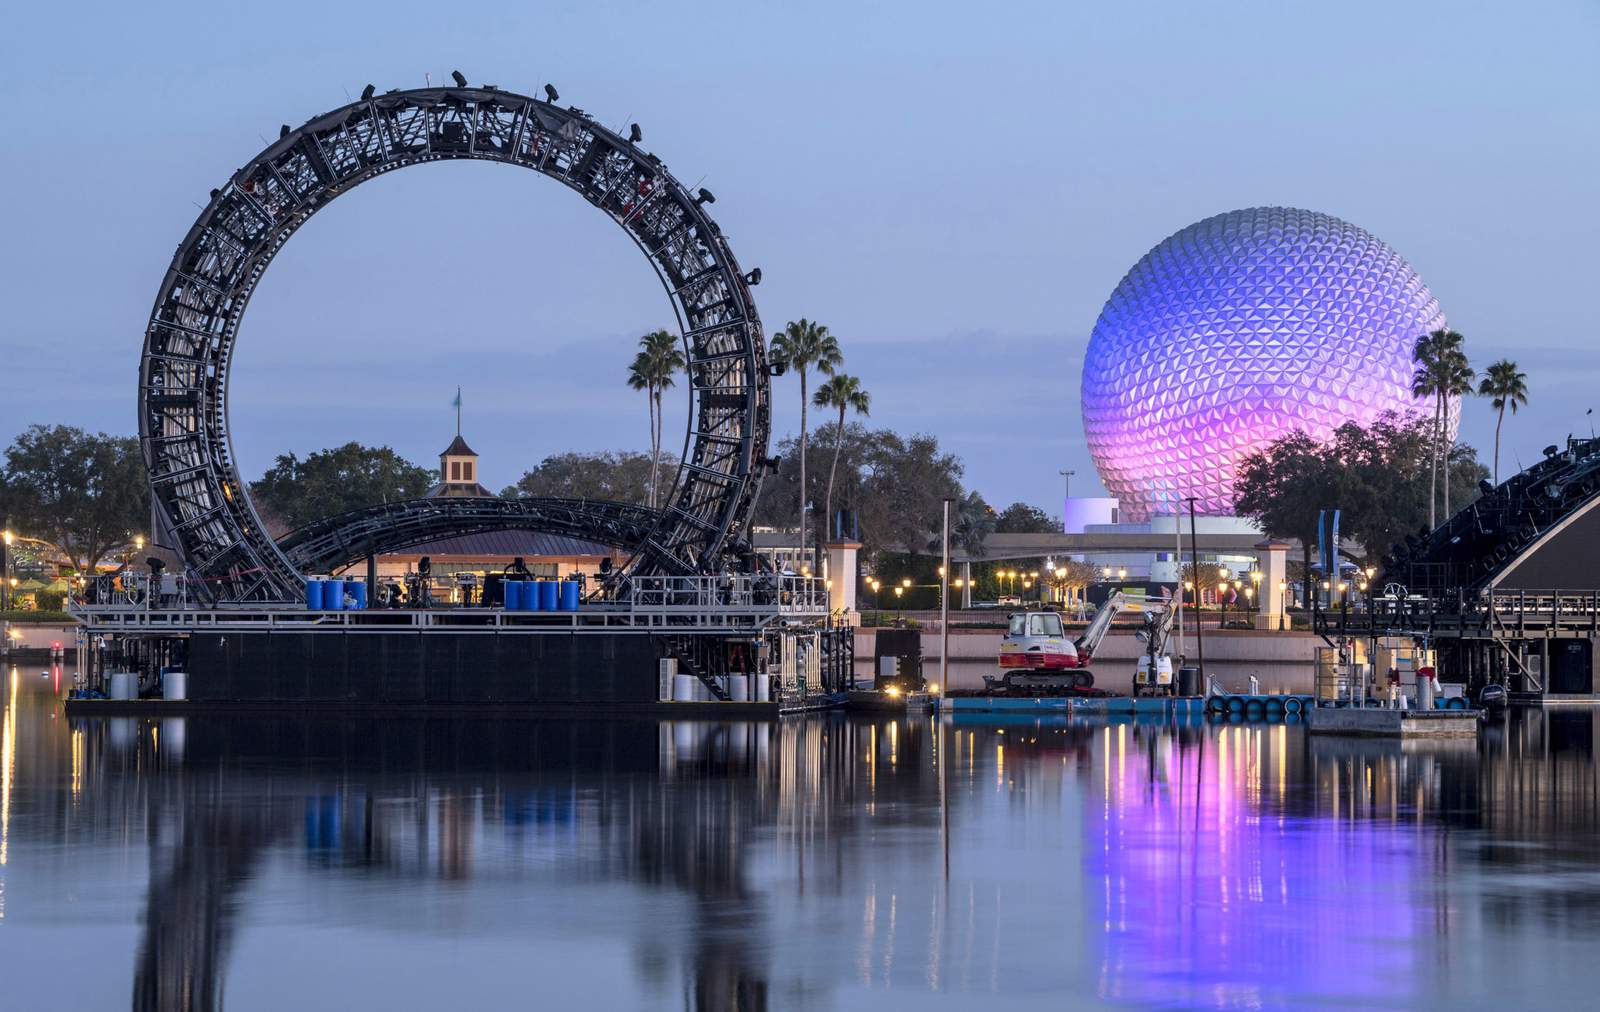 Disney rolls out circular, 6-story tall ‘Harmonious’ center barge